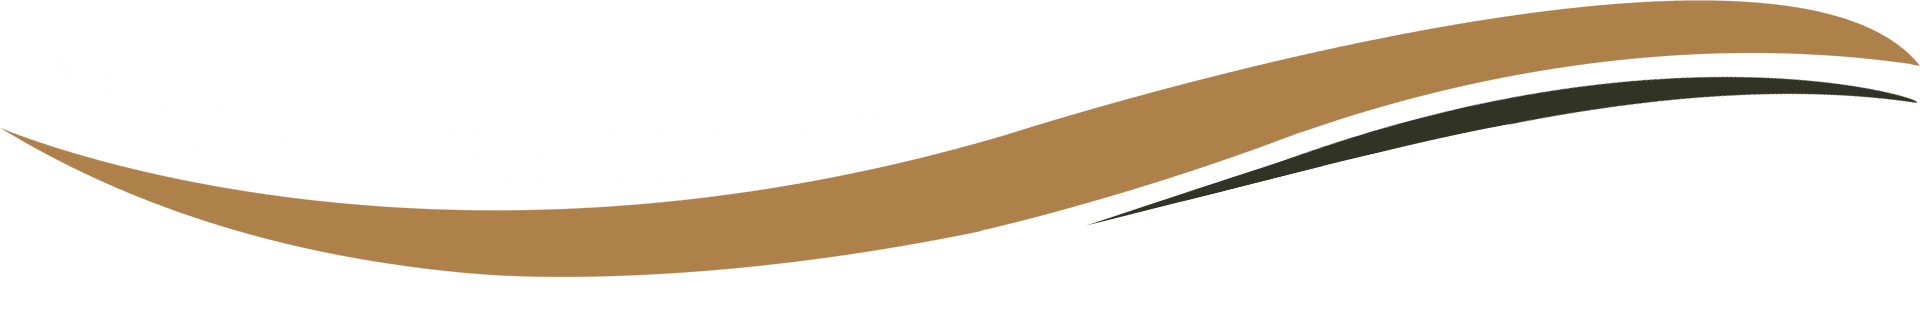 A green and brown background with white lines.